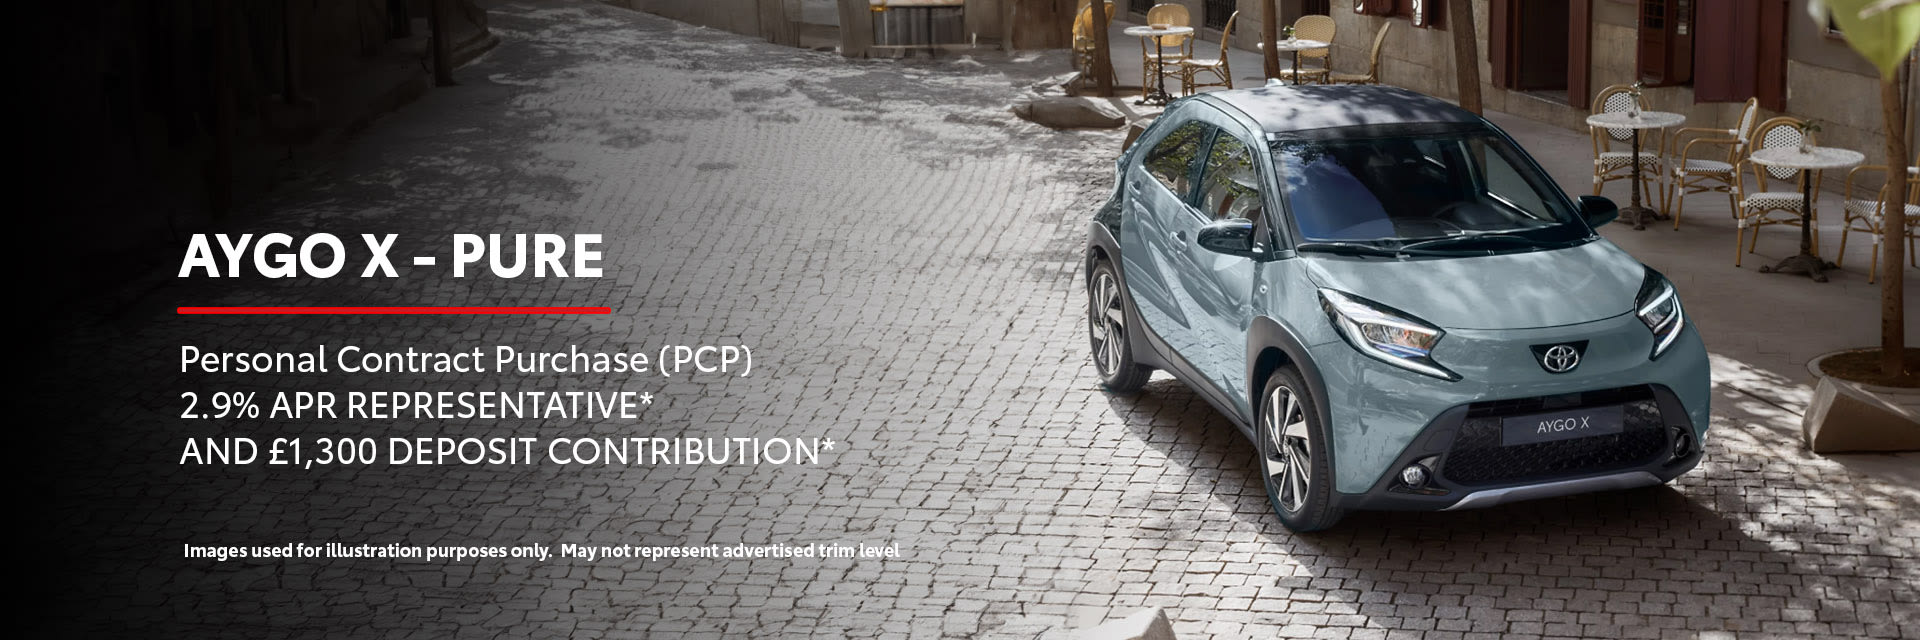 AYGO X - PURE with £1,300 deposit contribution